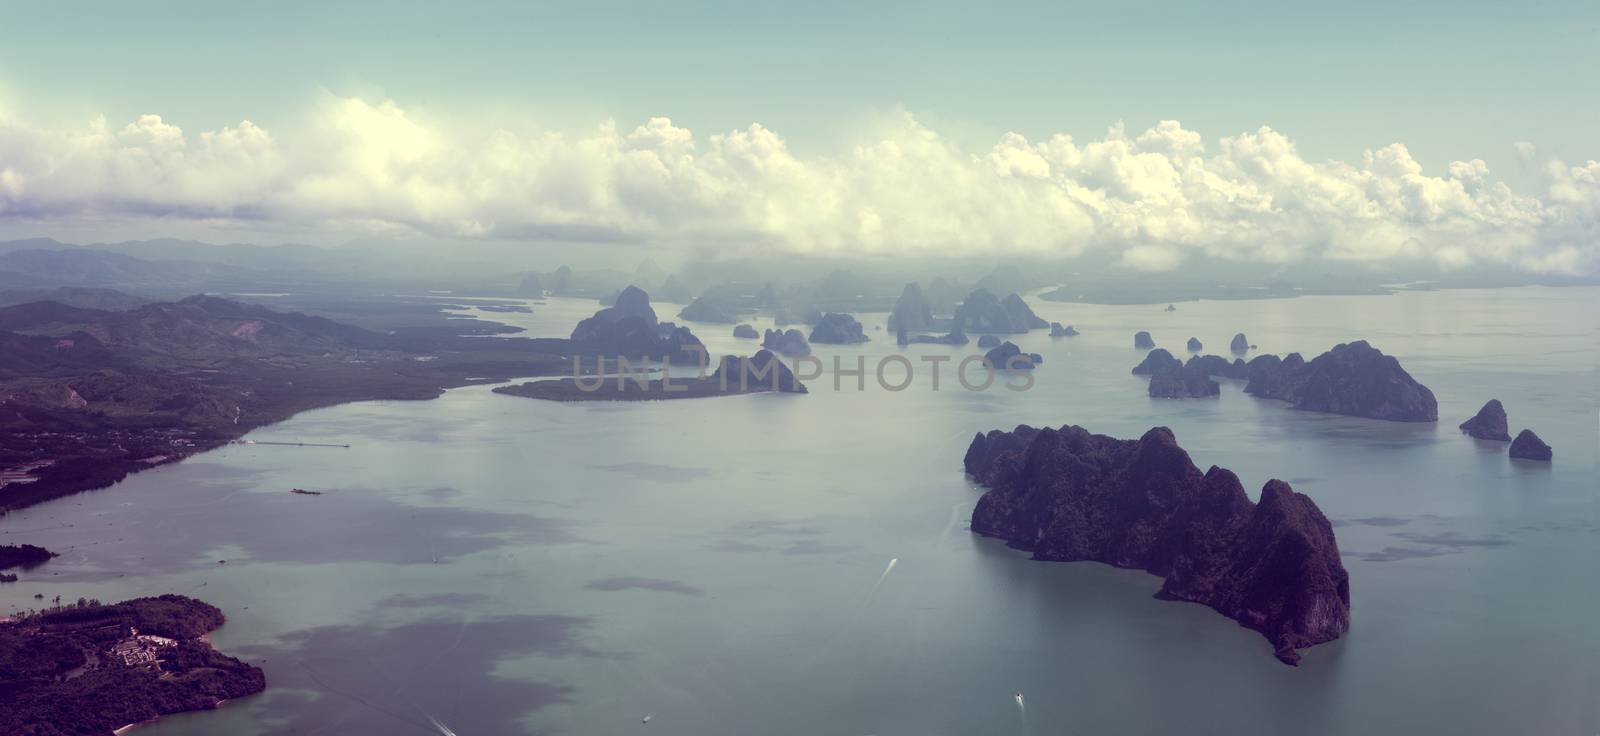 Seascape and Thailand islands from aerial view by carloscastilla